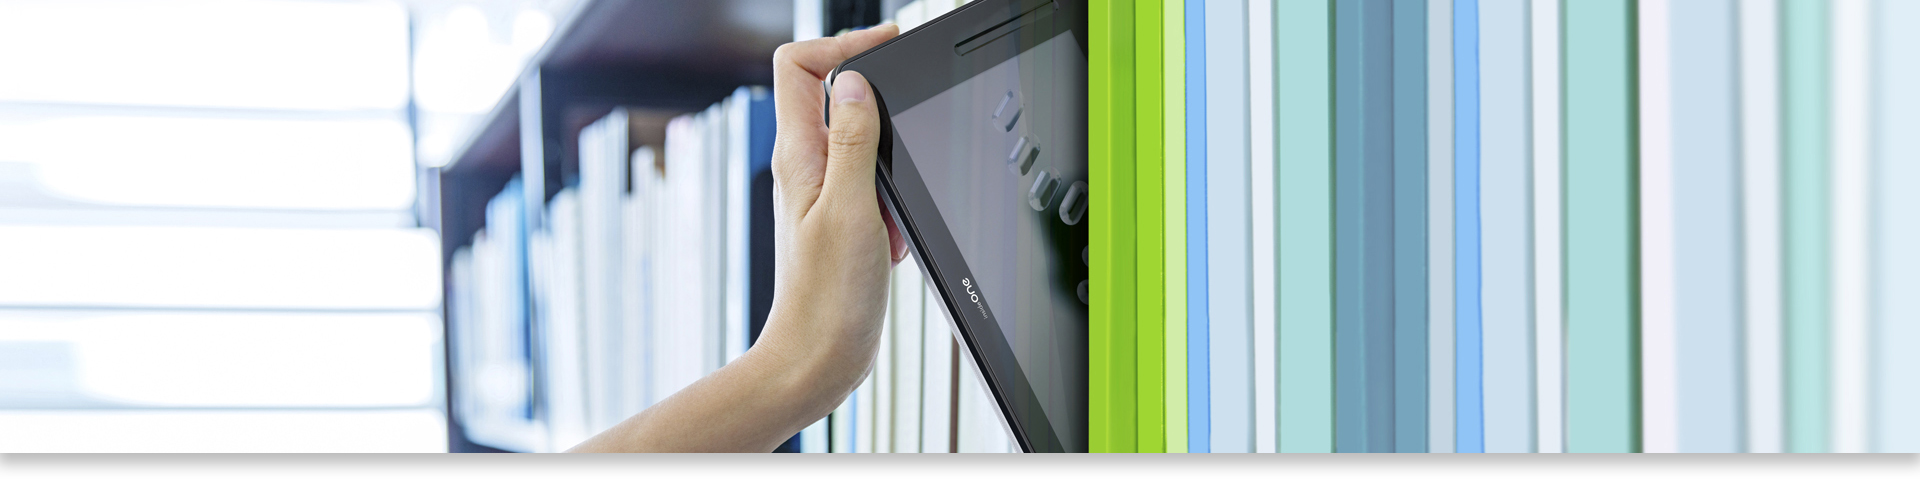 The picture shows a hand picking up the insideONE Braille tactile tablet stored in a bookcase like a book.